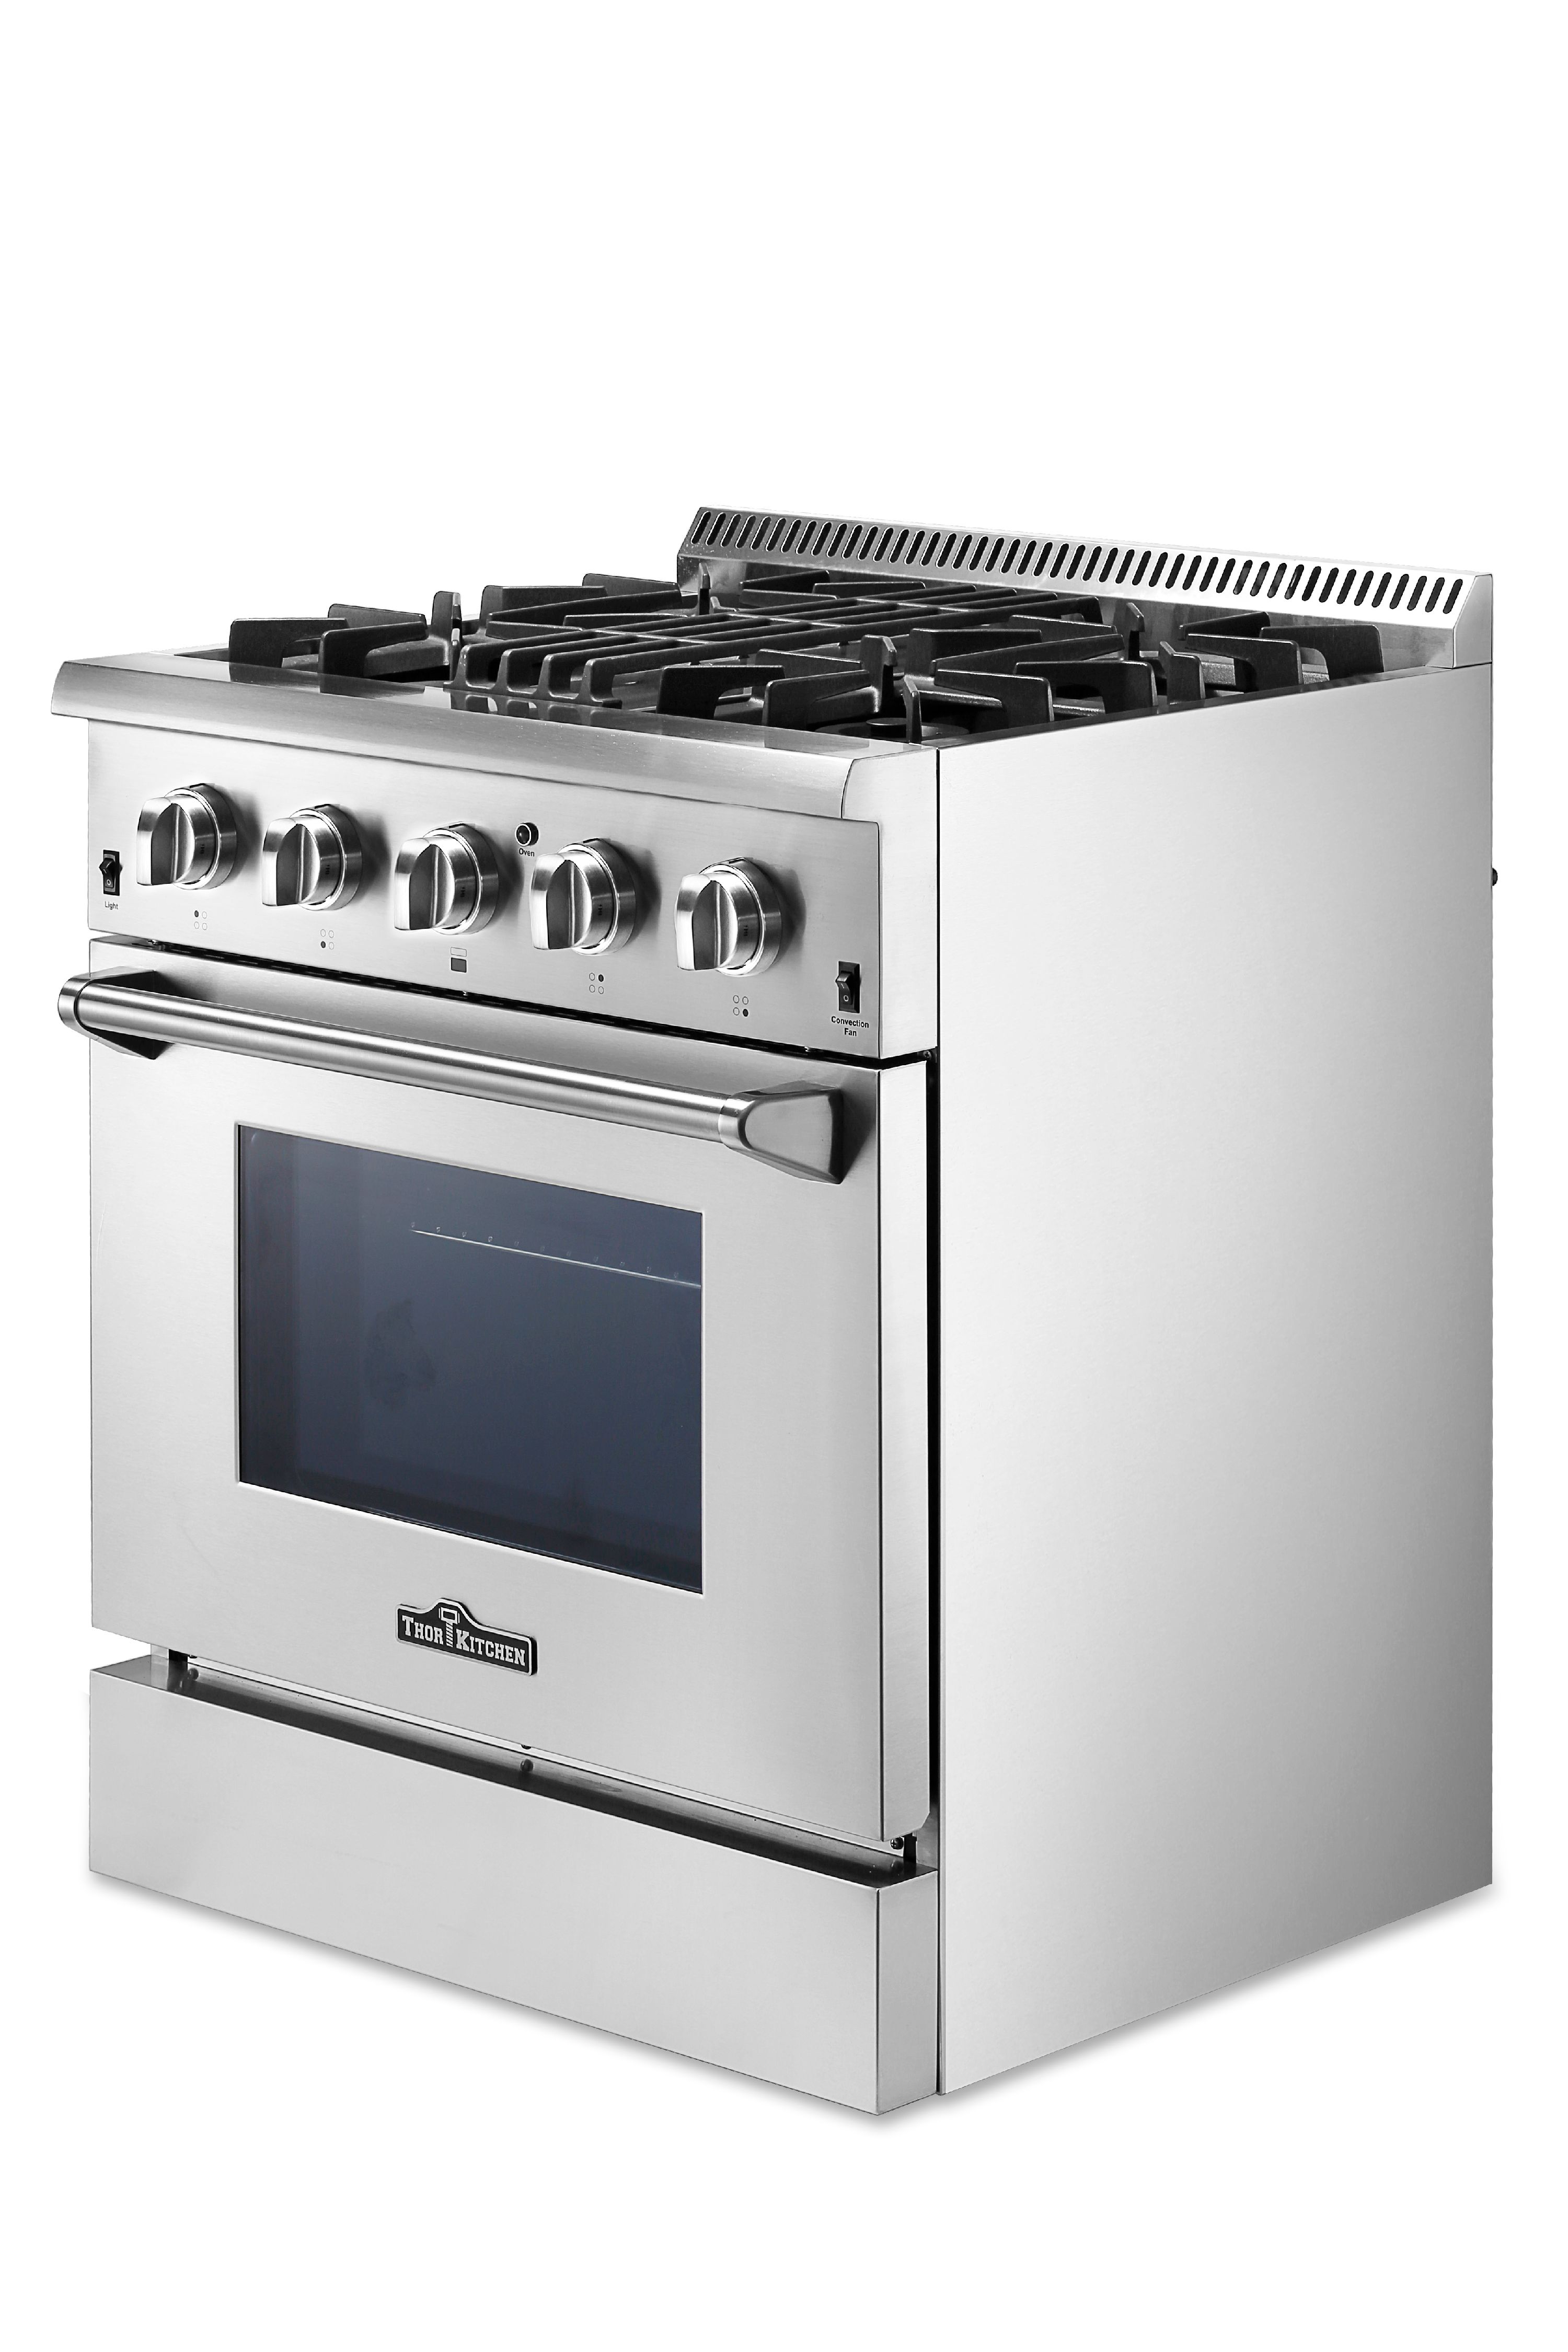 Thor Kitchen 30" Professional Free Standing Dual Fuel Range, Stainless Steel - image 3 of 6